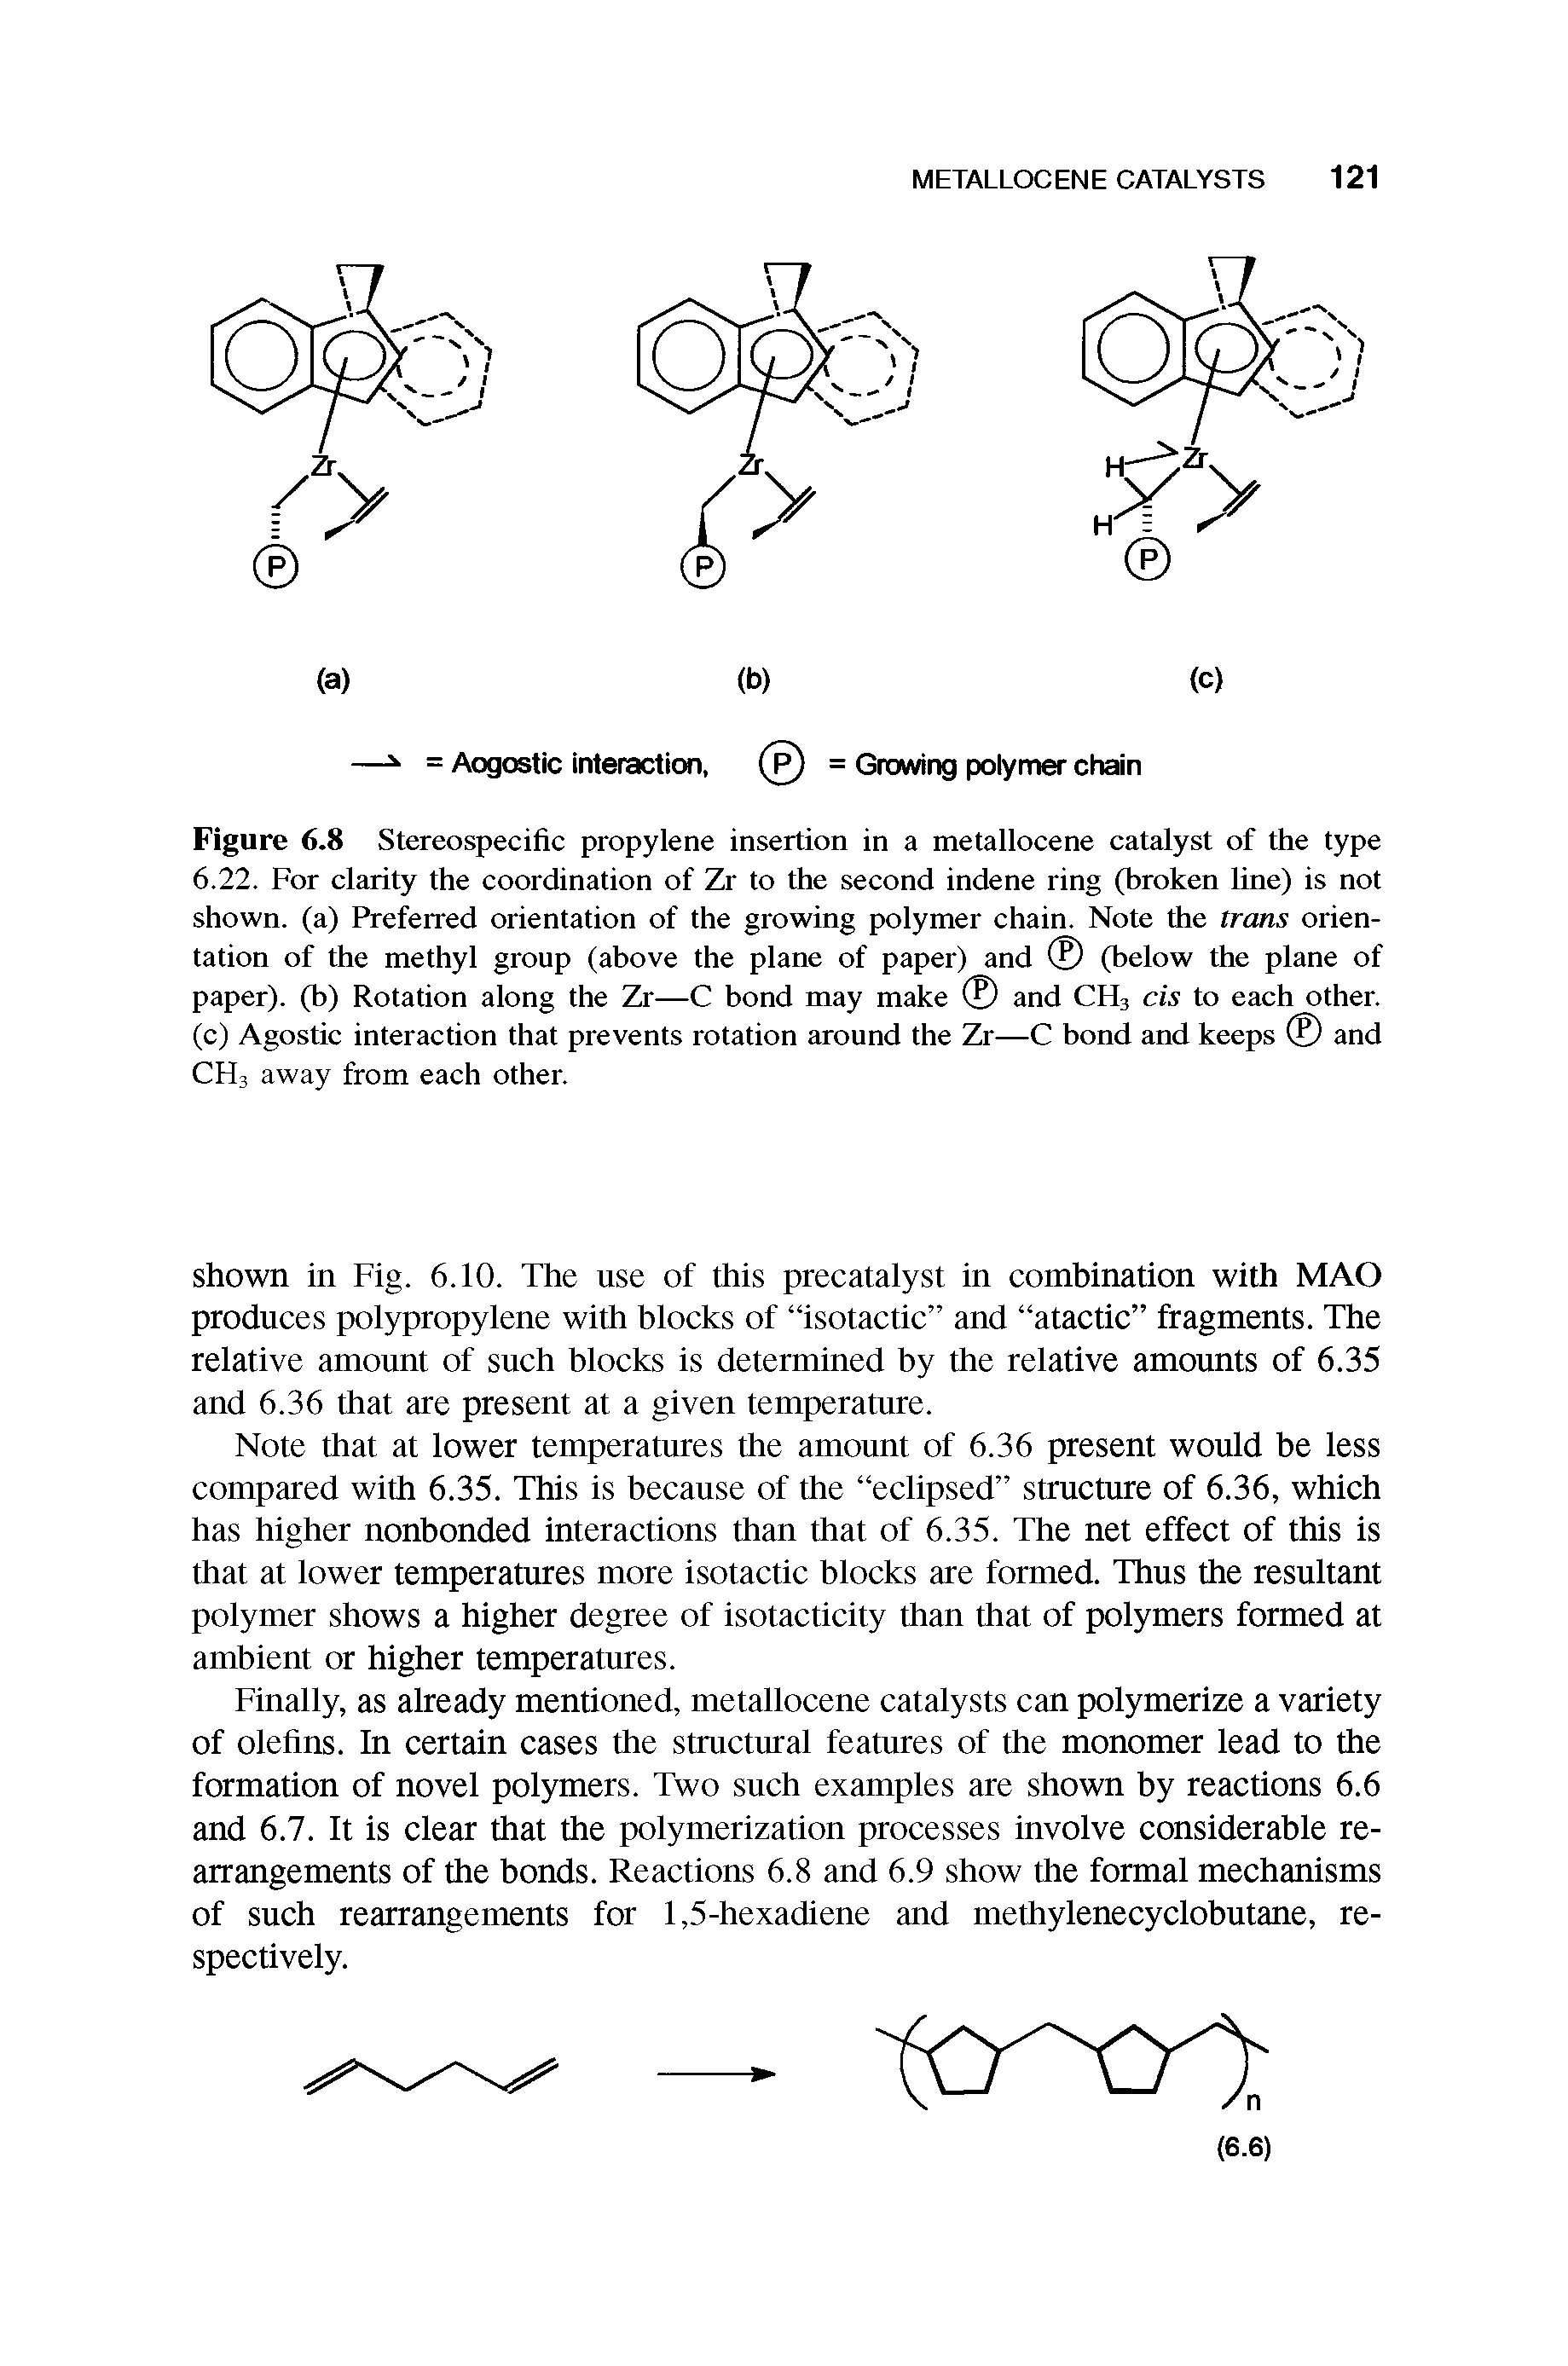 Figure 6.8 Stereospecific propylene insertion in a metallocene catalyst of the type 6.22. For clarity the coordination of Zr to the second indene ring (broken line) is not shown, (a) Preferred orientation of the growing polymer chain. Note the trans orientation of the methyl group (above the plane of paper) and (below the plane of paper), (b) Rotation along the Zr—C bond may make and CH3 cis to each other, (c) Agostic interaction that prevents rotation around the Zr—C bond and keeps and CH3 away from each other.